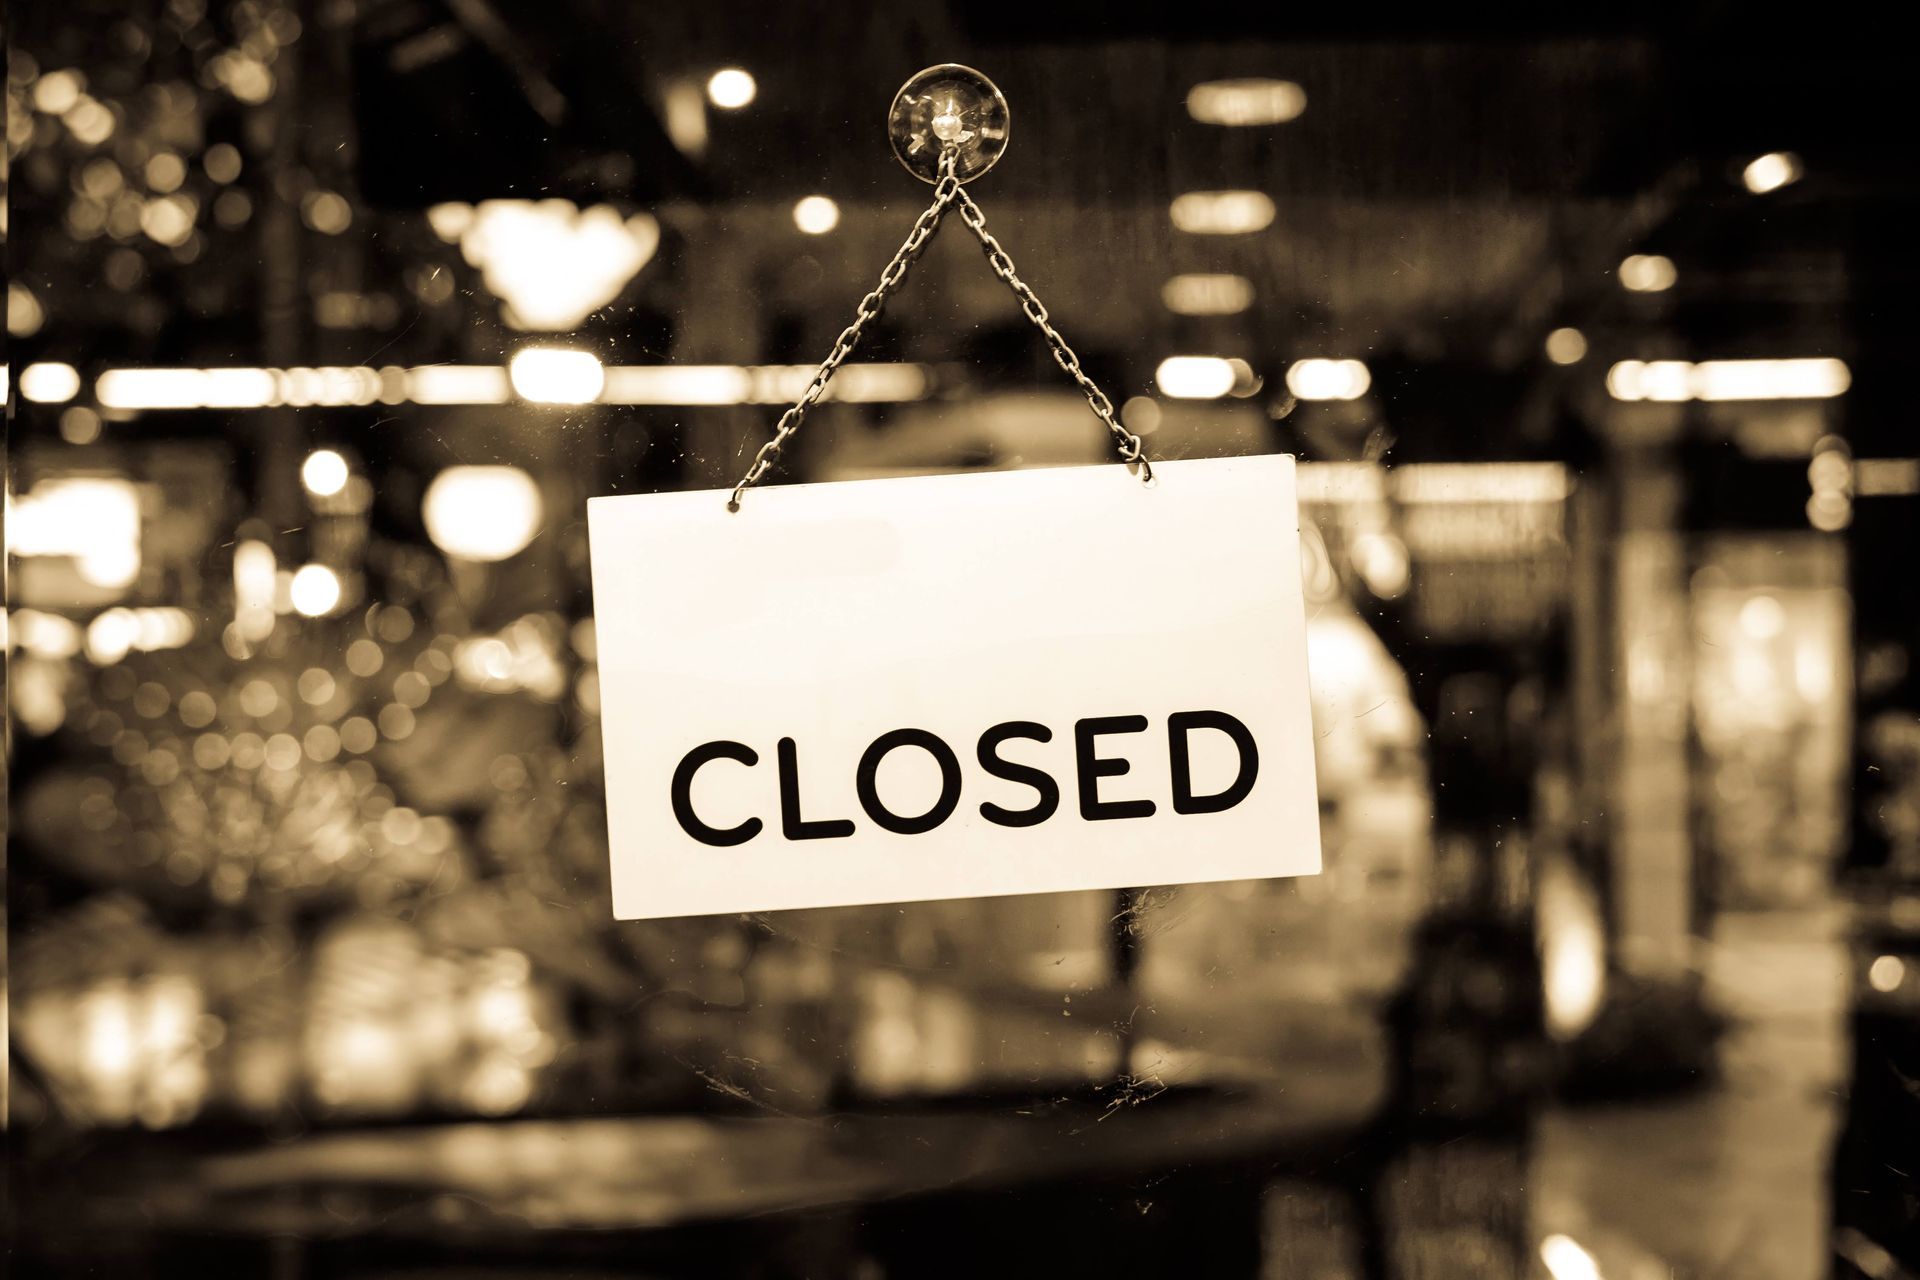 An image of a closed sign on the door of a business. The lights are on, showcasing indoor furniture and chandeliers.